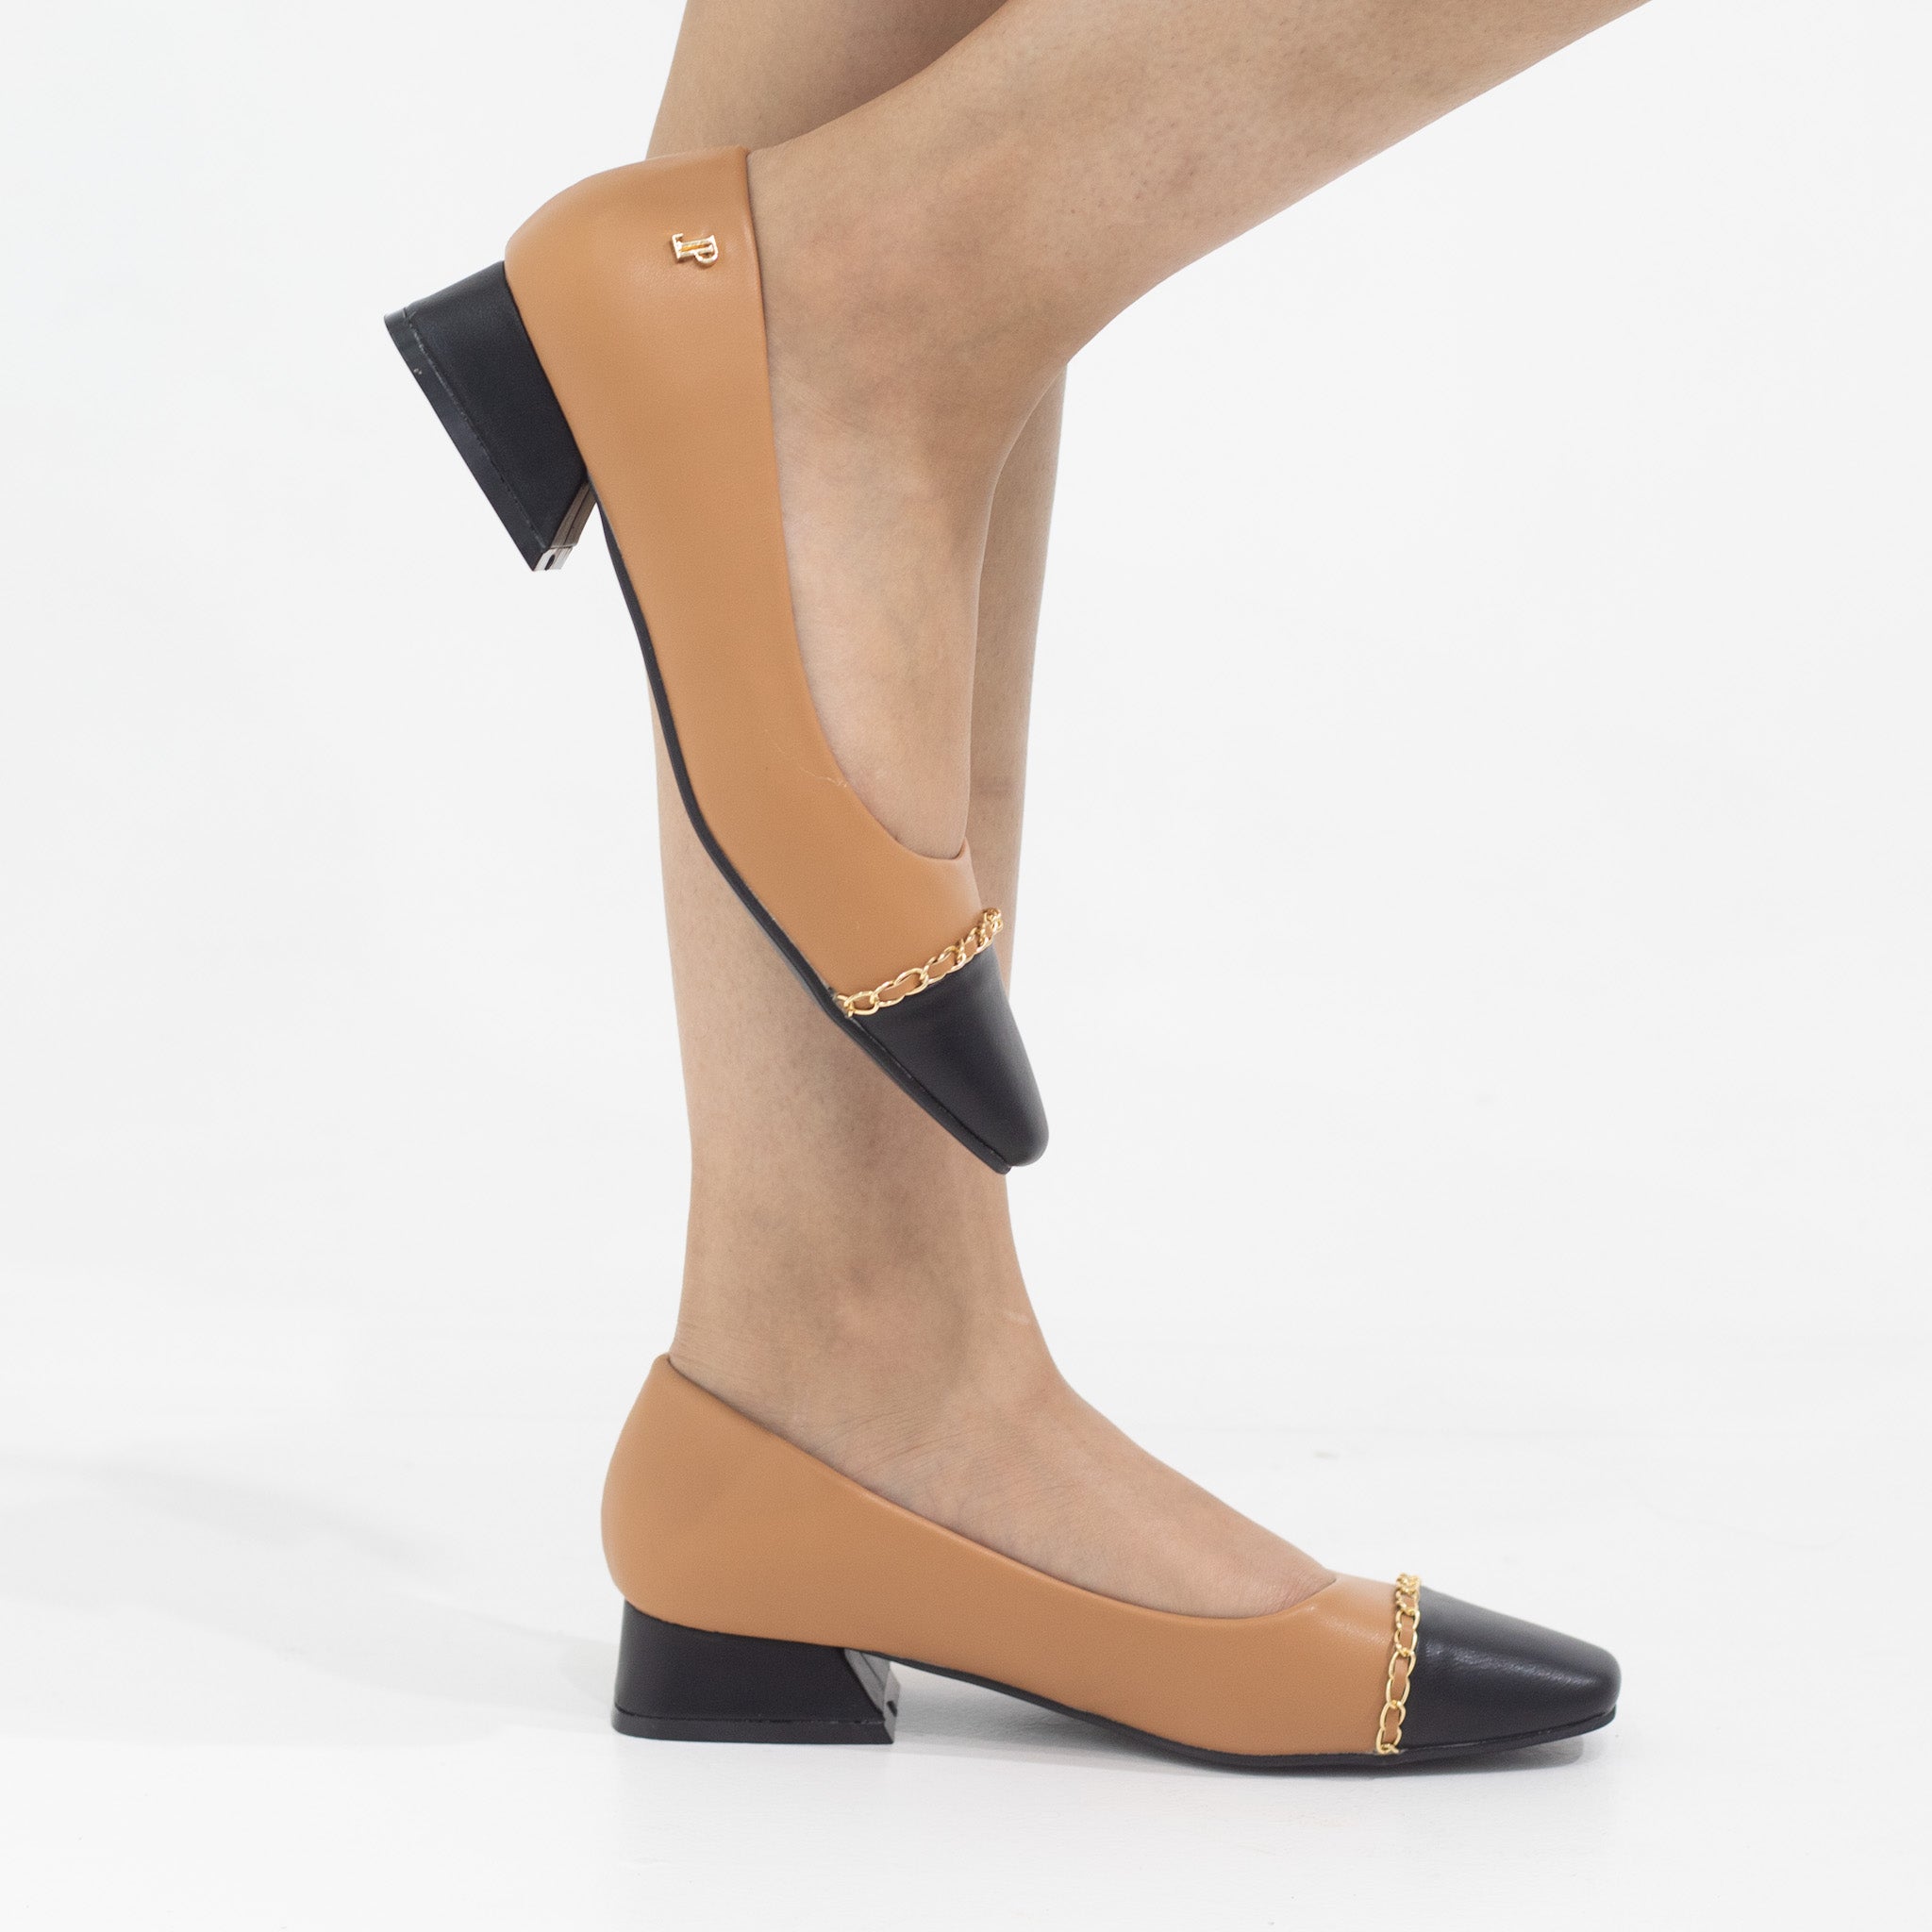 Laika two toned 2.5cm heel with court camel